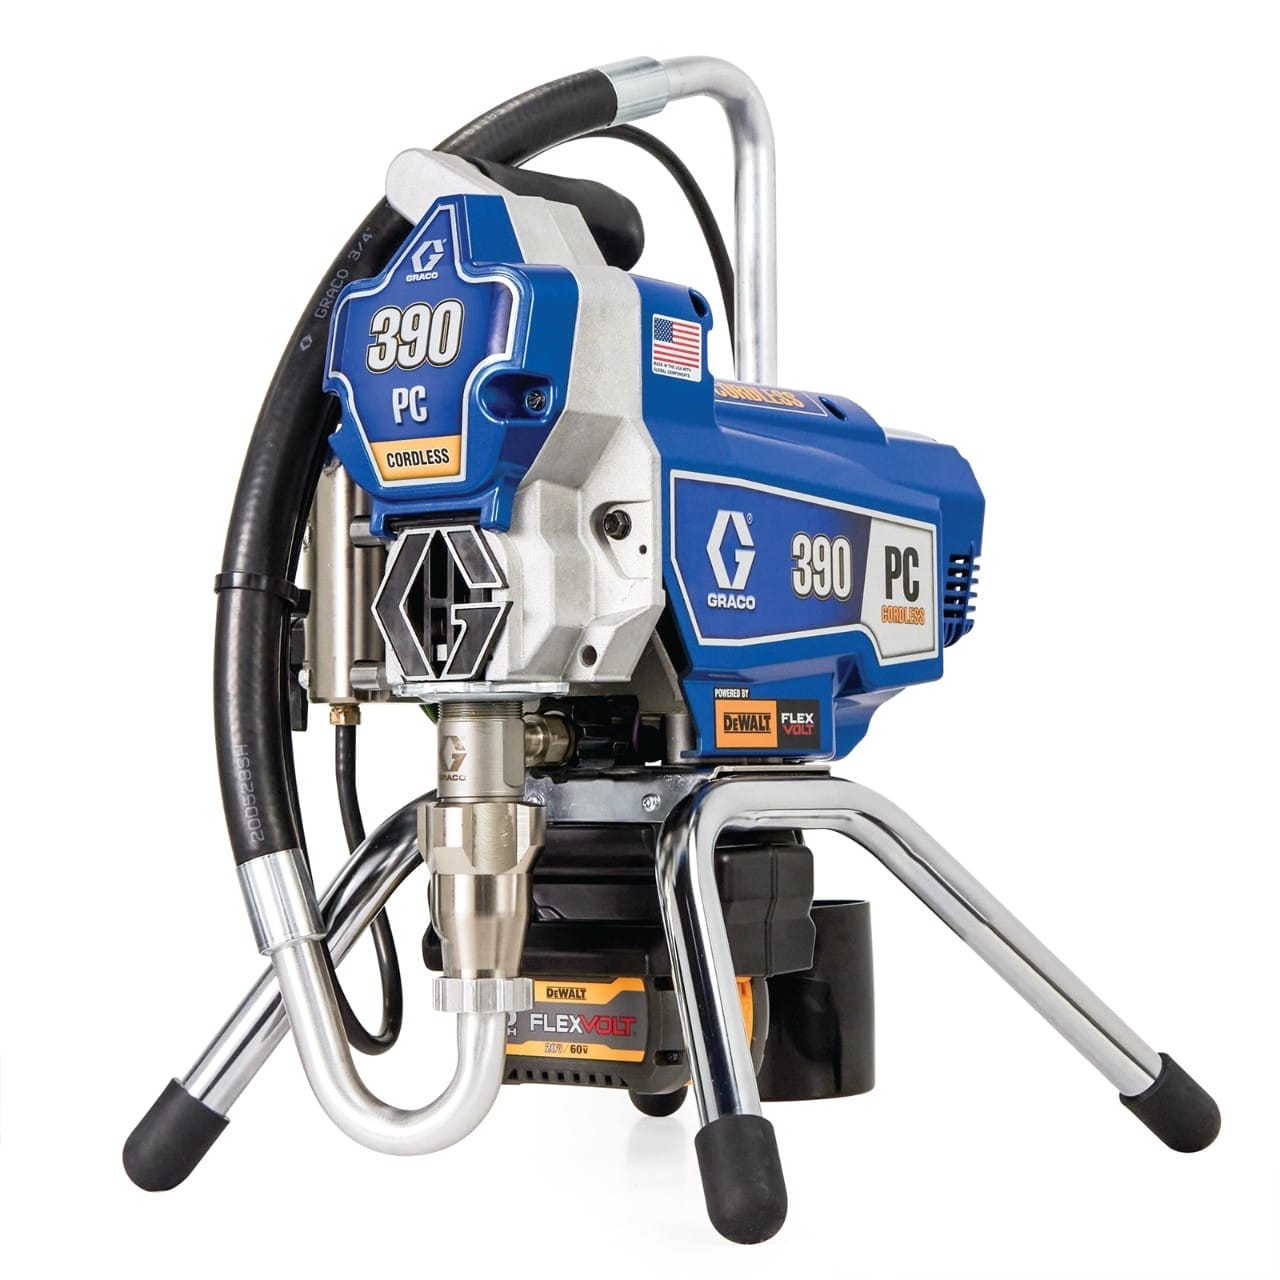 Graco 390 PC Cordless Airless Sprayer, Stand